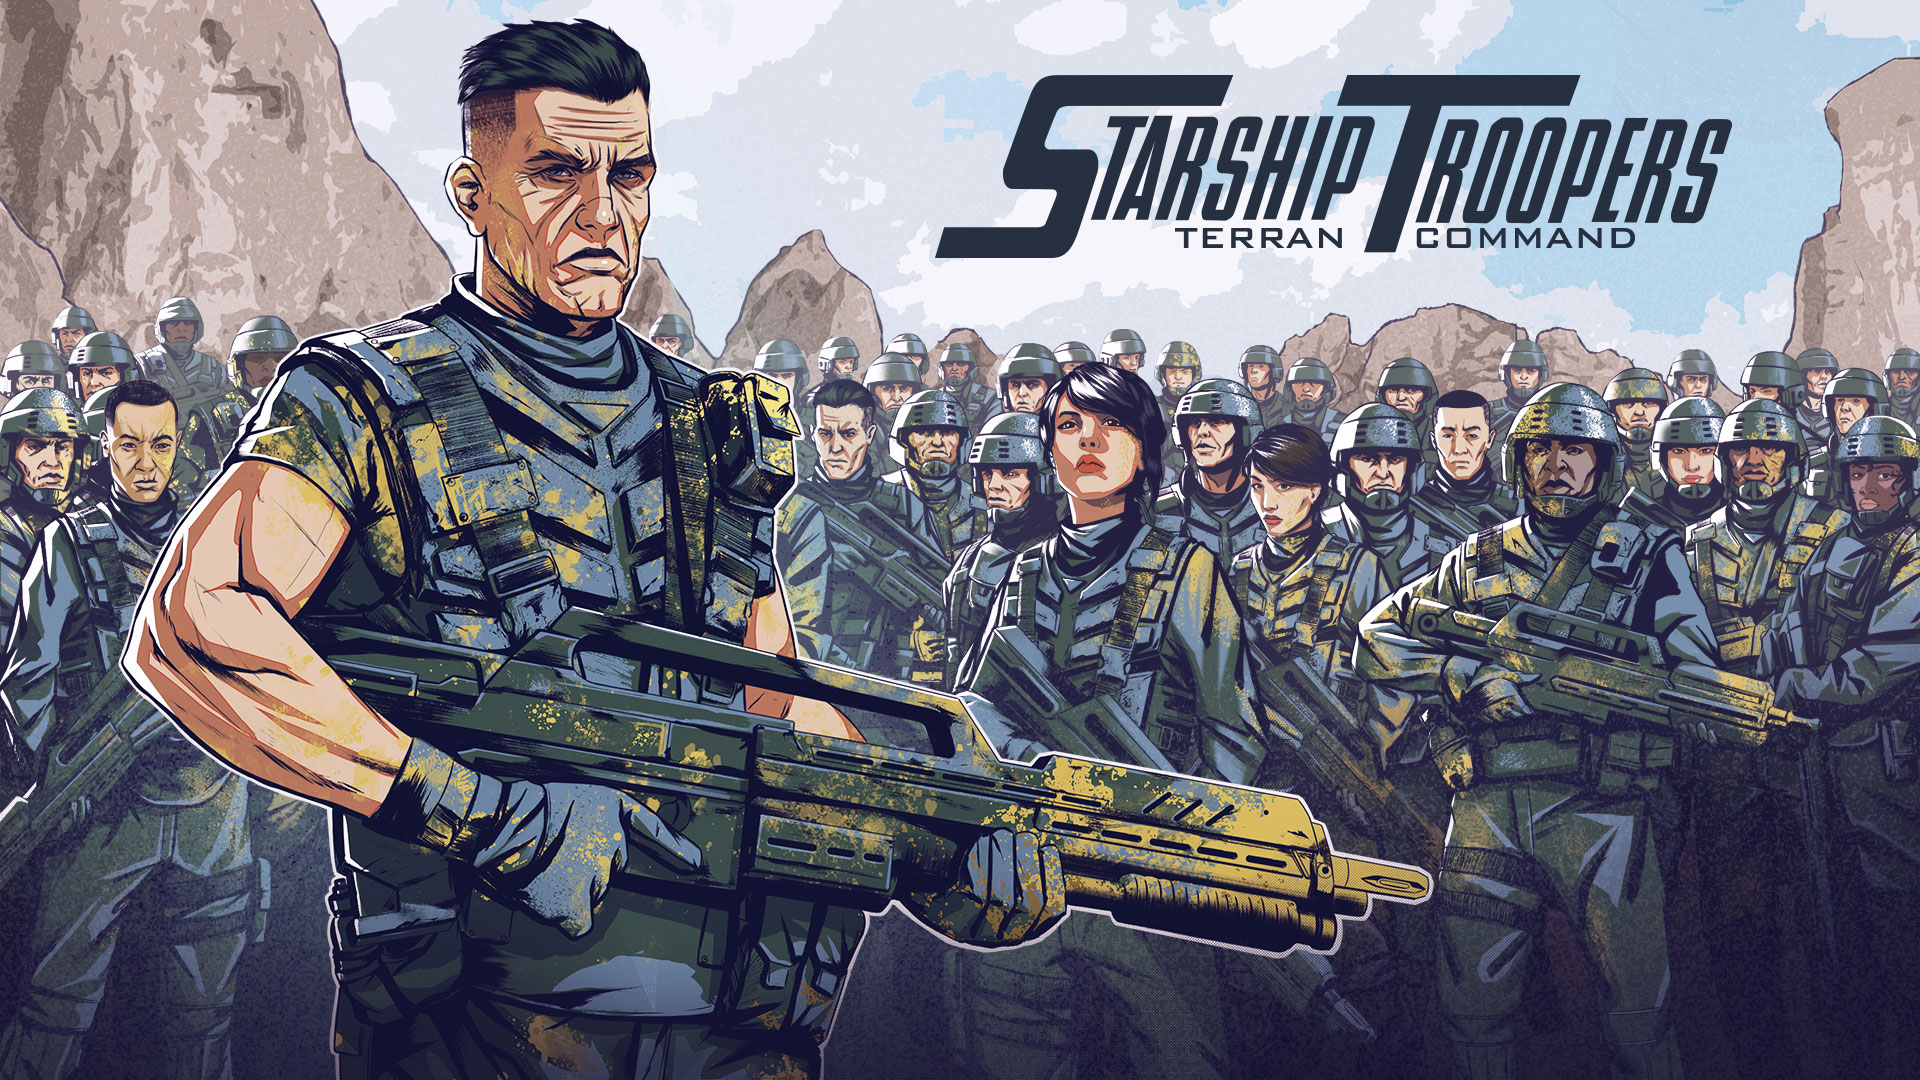 Fotorreseña de Starship Troopers the roleplaying game